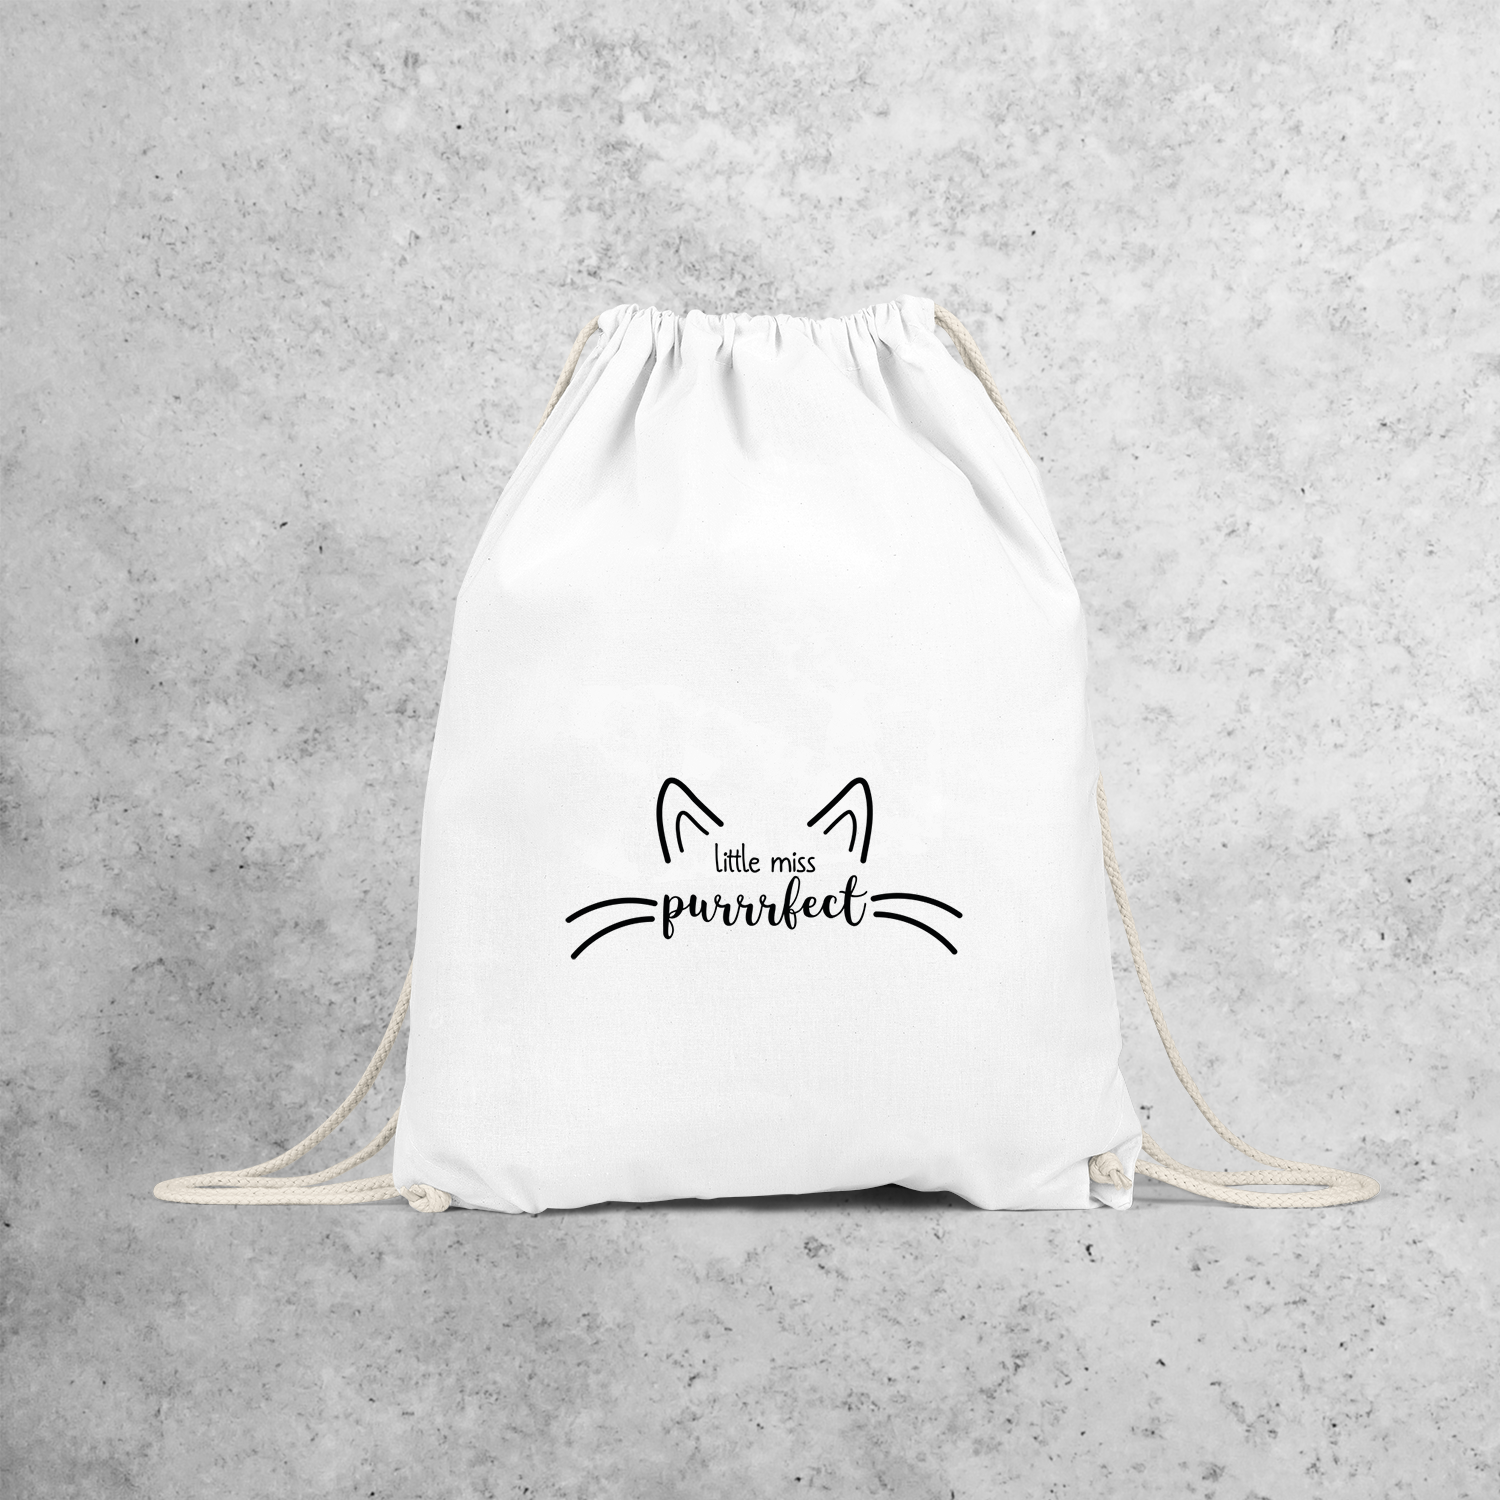 'Little miss purrrfect' backpack